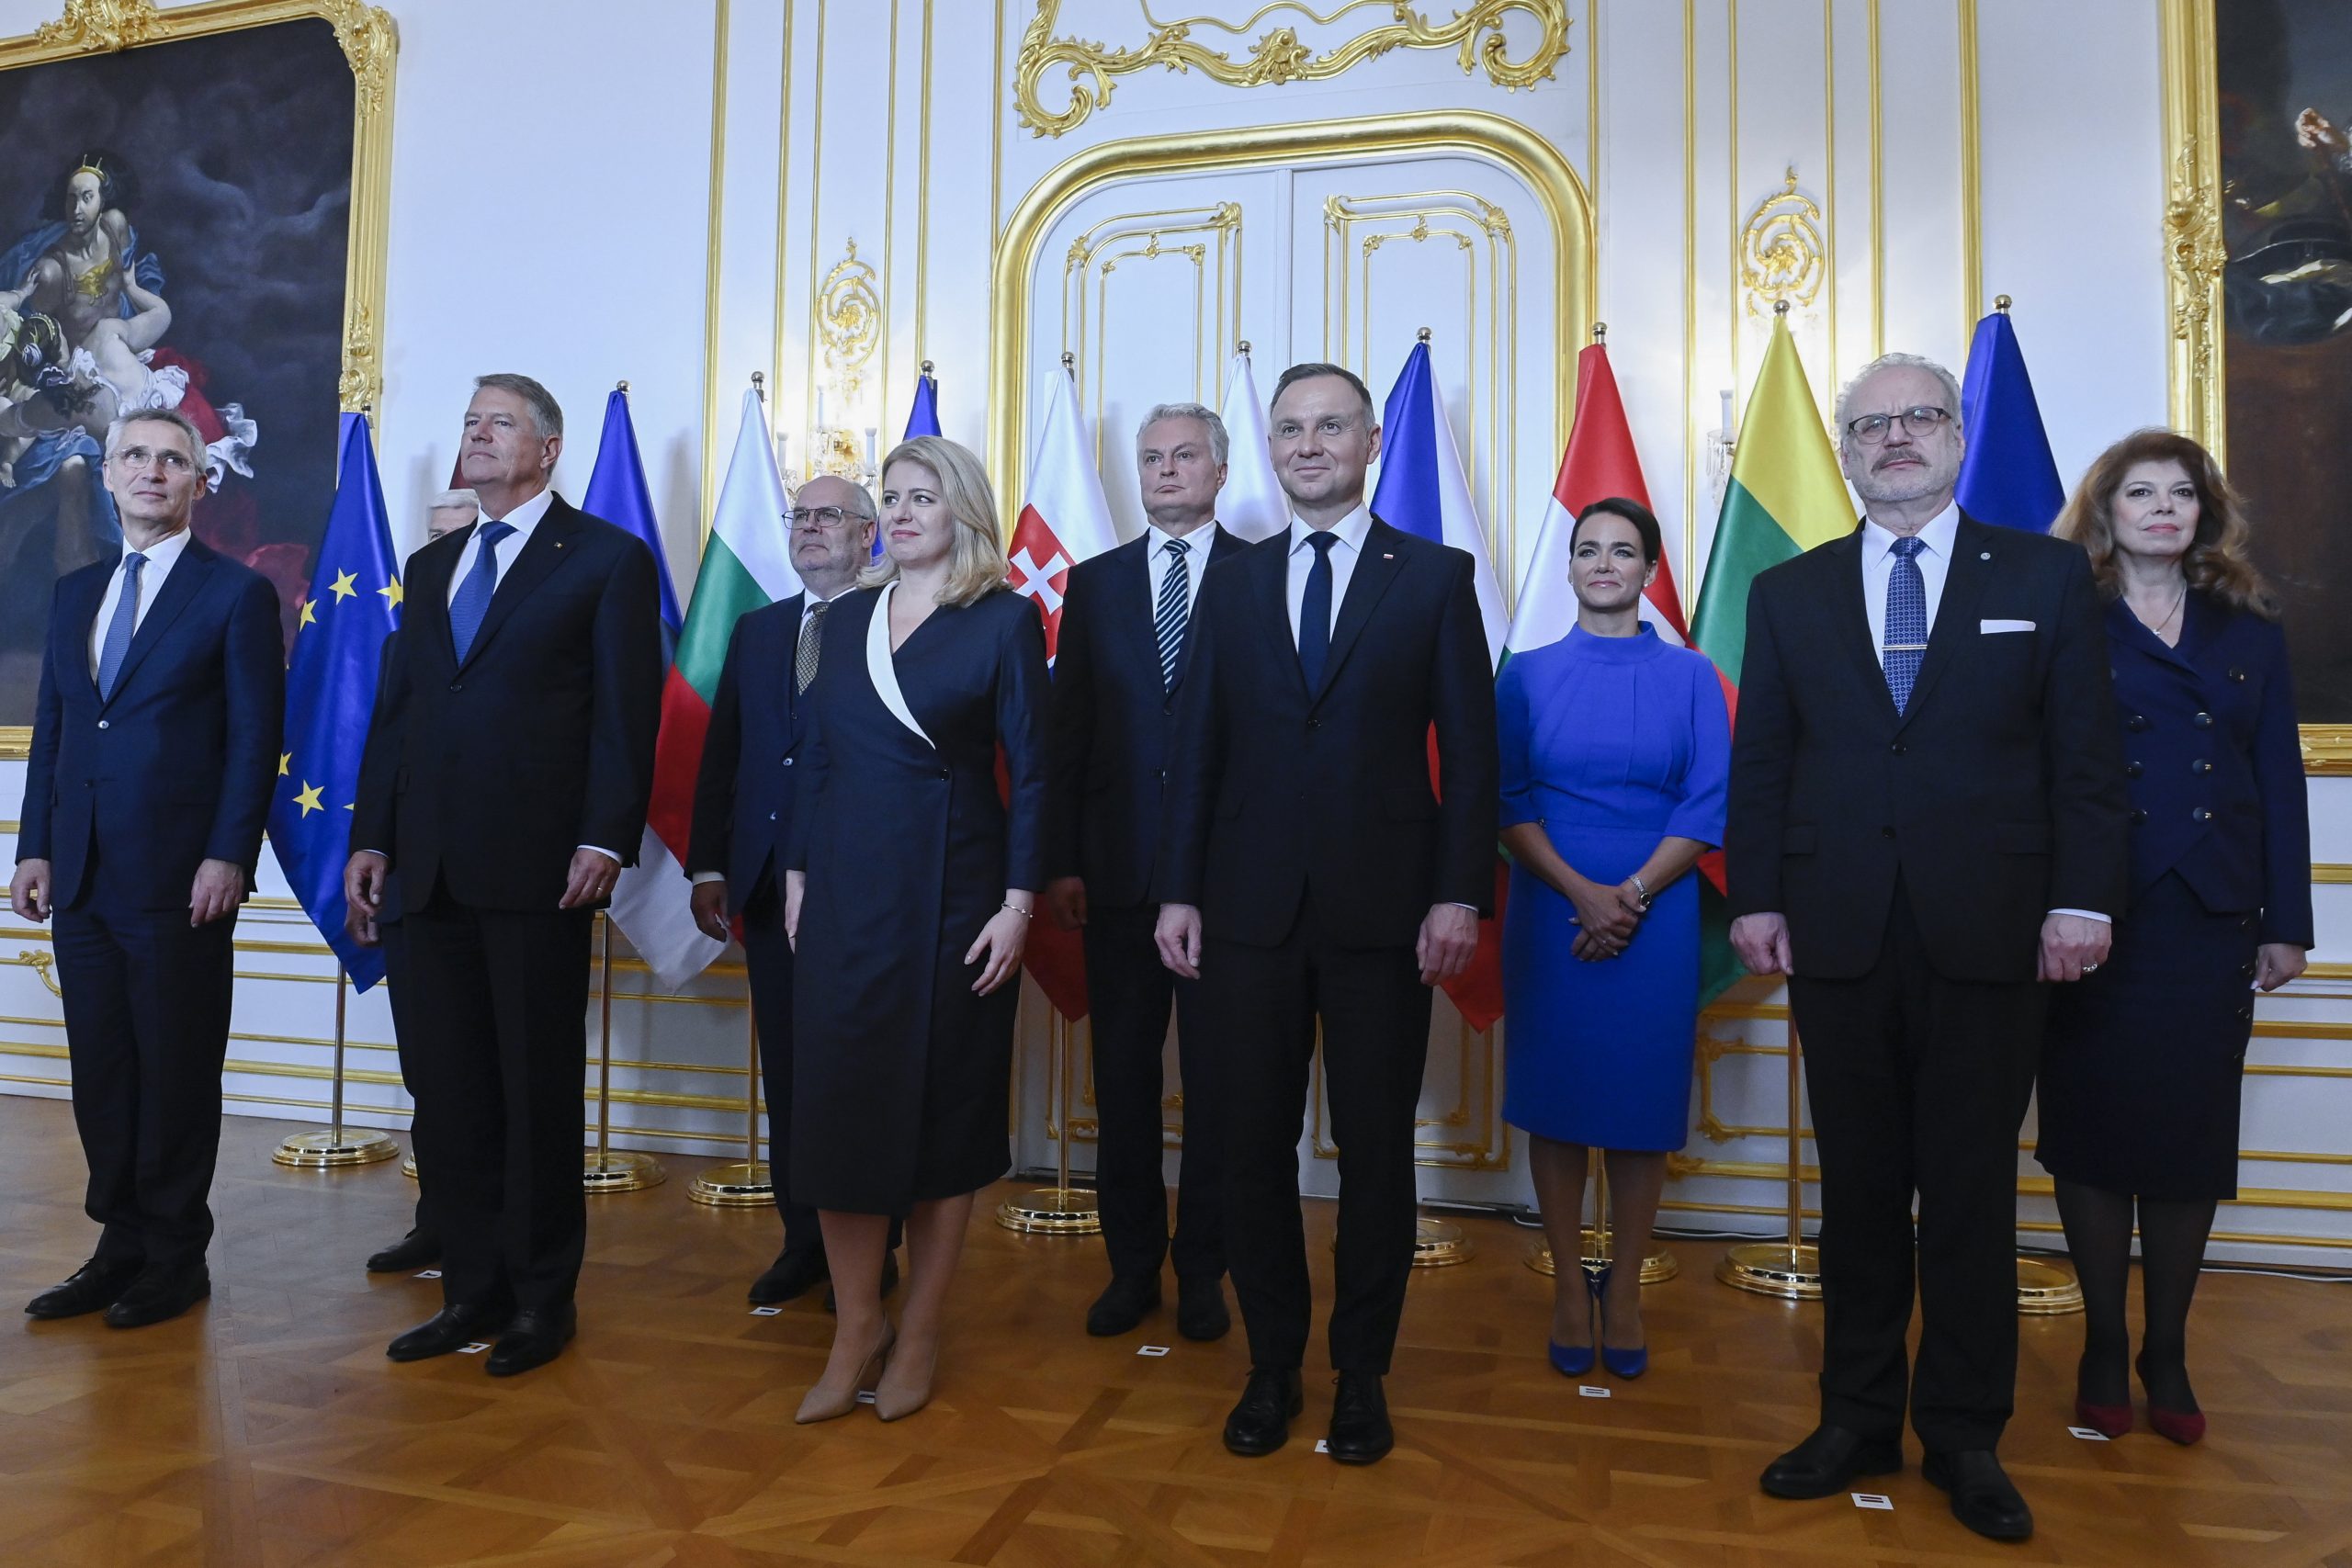 Hungary and B9 in Favor of Ukraine NATO Membership Perspective